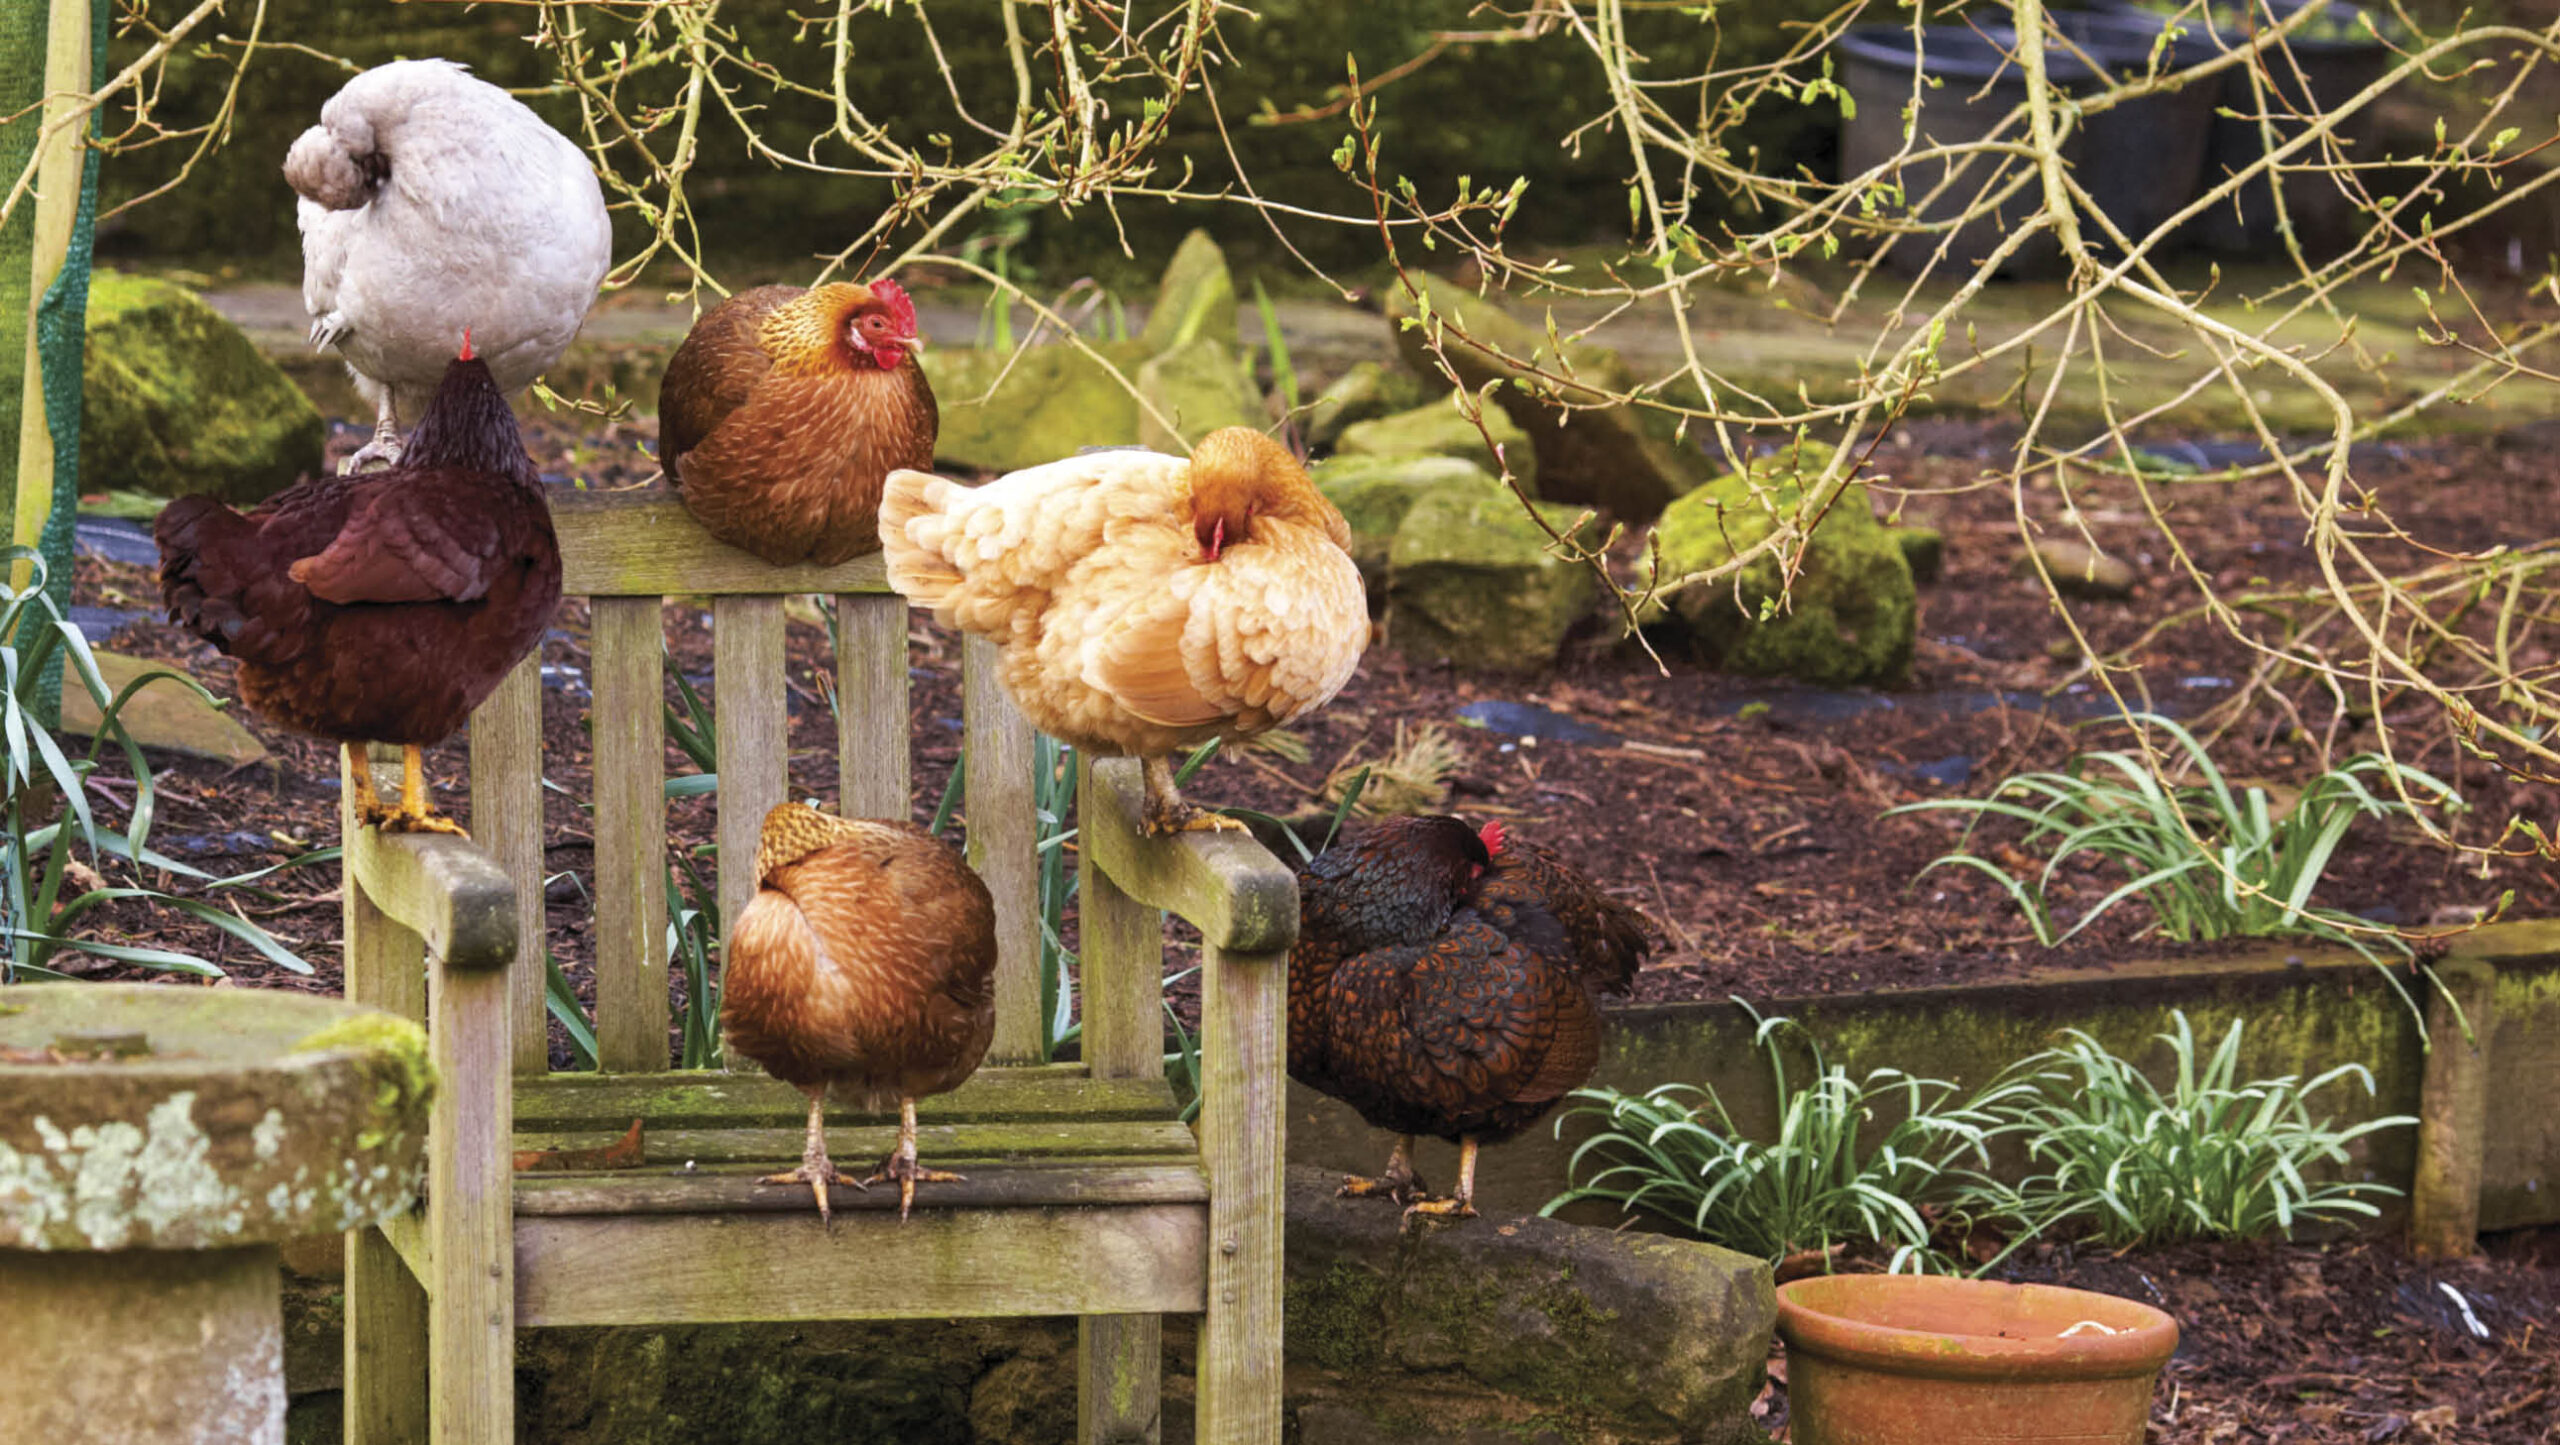 Contented chooks.